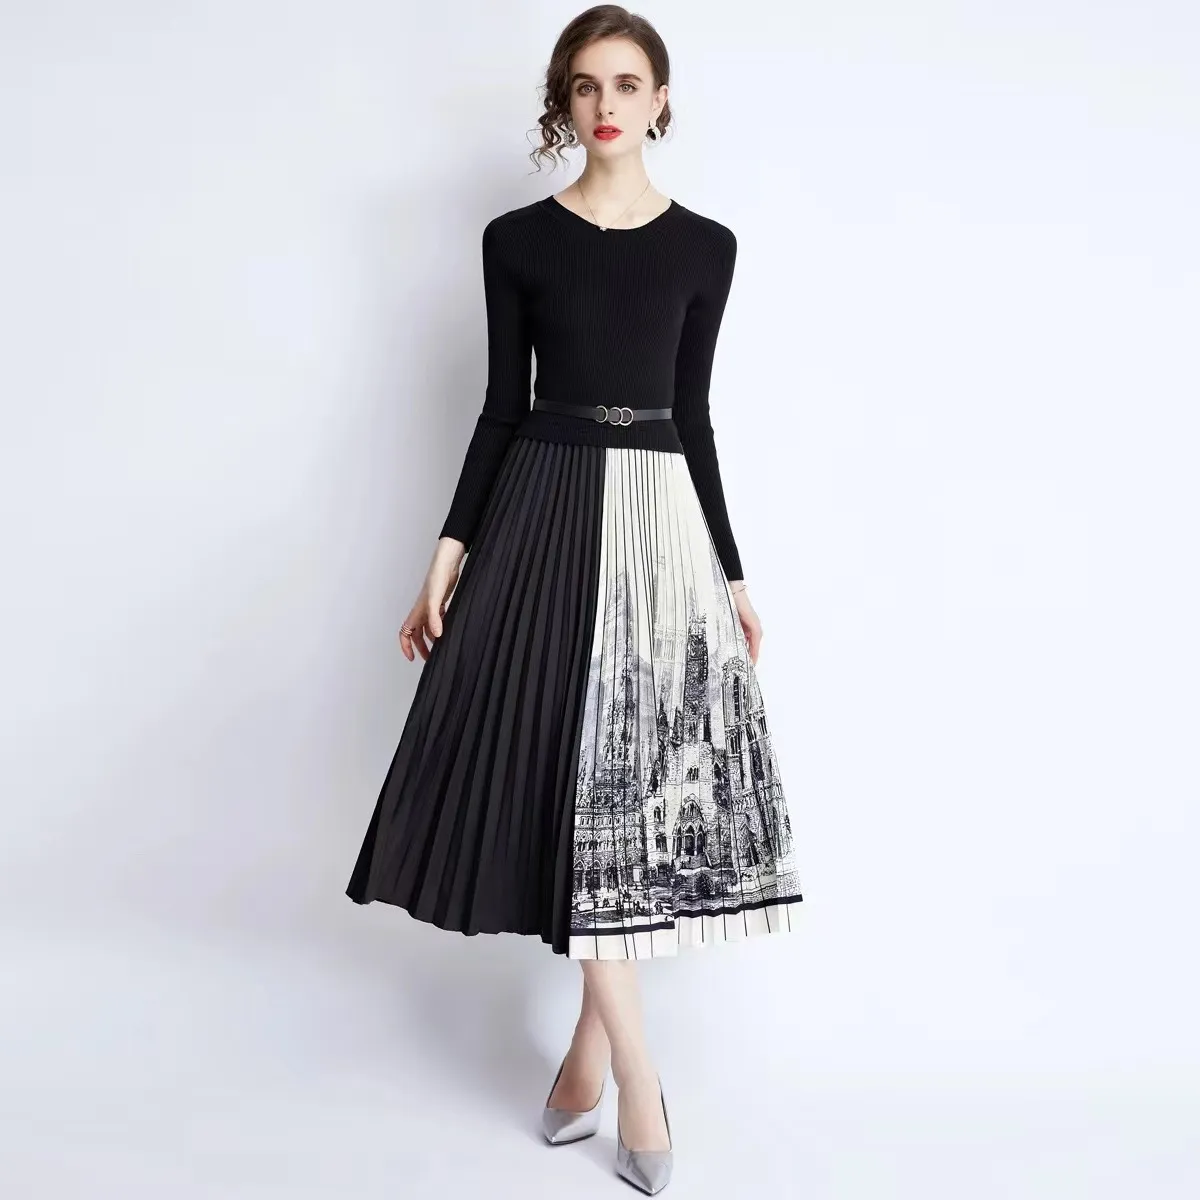 Hepburn style French early autumn fashion dress for women with waist up and slimming effect. Ink painting print patchwork knitted pleated long skirt